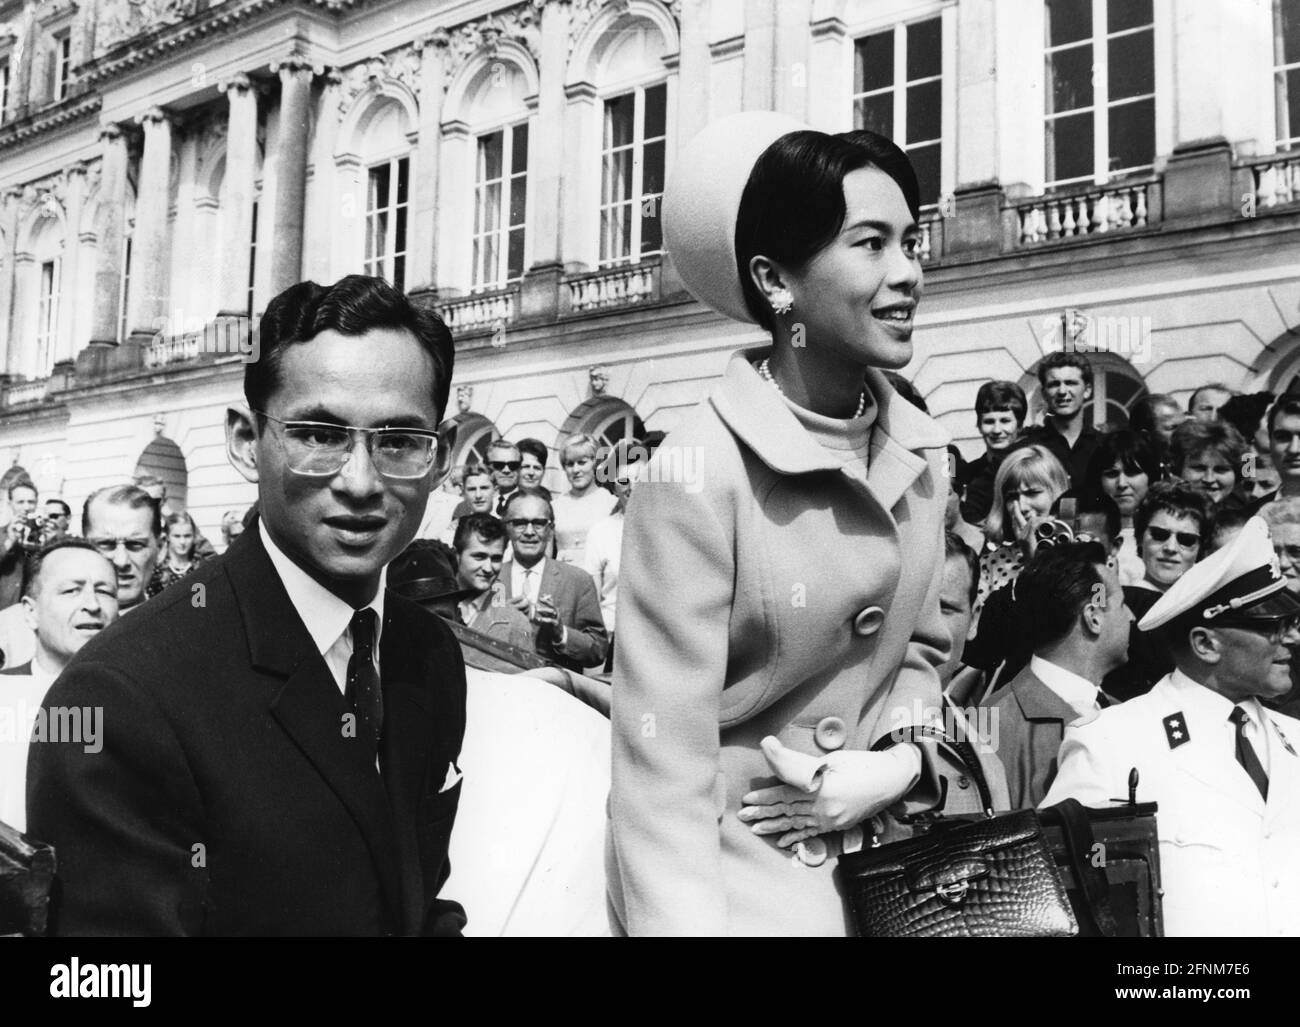 Rama IX. Bhumibol Adulyadai, 5.12.1927 - 13.10.2016, King of Thailand 9.6.1946 - 13.10.2016, ADDITIONAL-RIGHTS-CLEARANCE-INFO-NOT-AVAILABLE Stock Photo